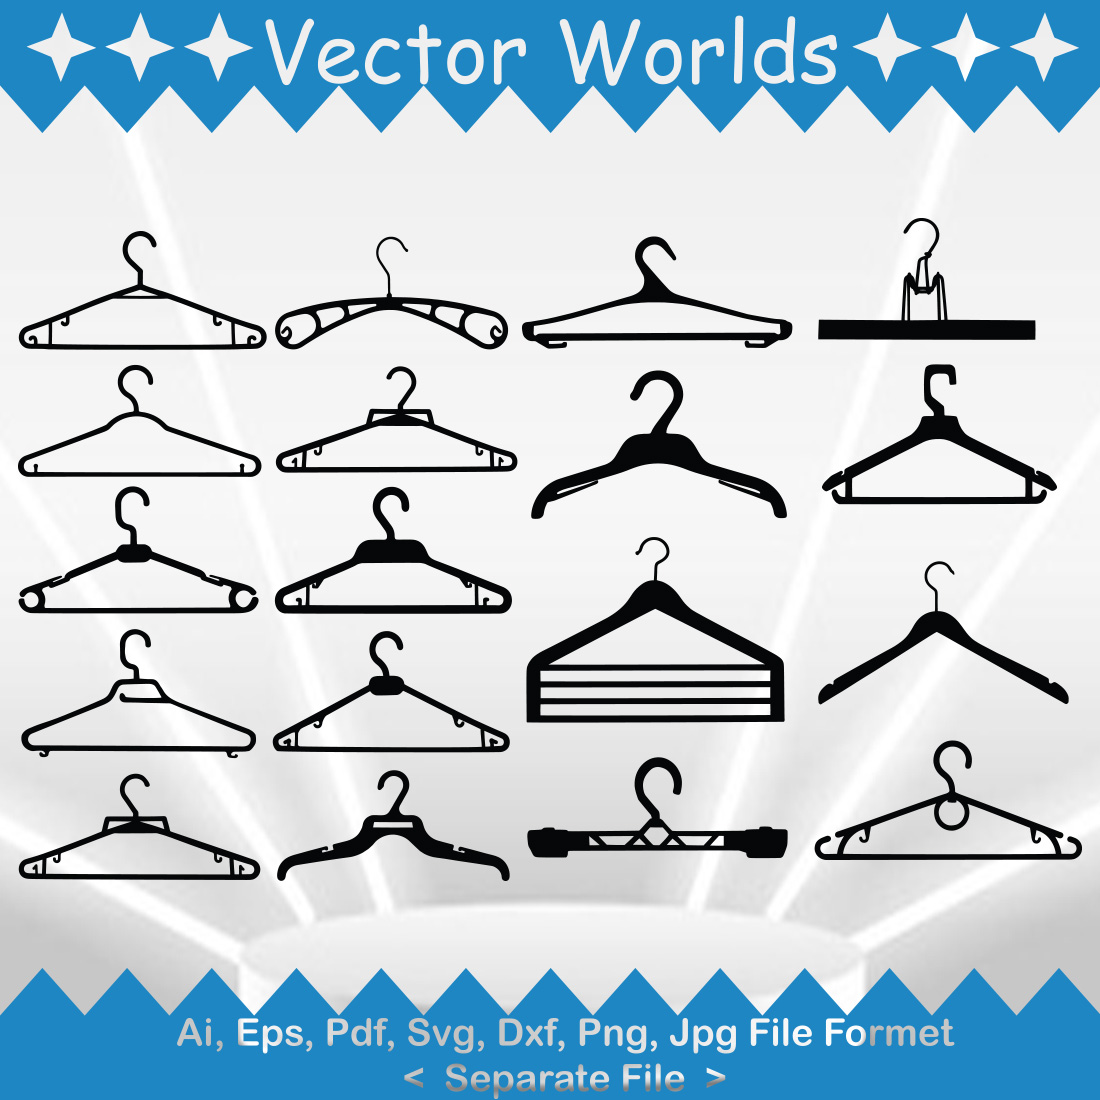 A selection of unique vector image silhouettes of a clothes hanger